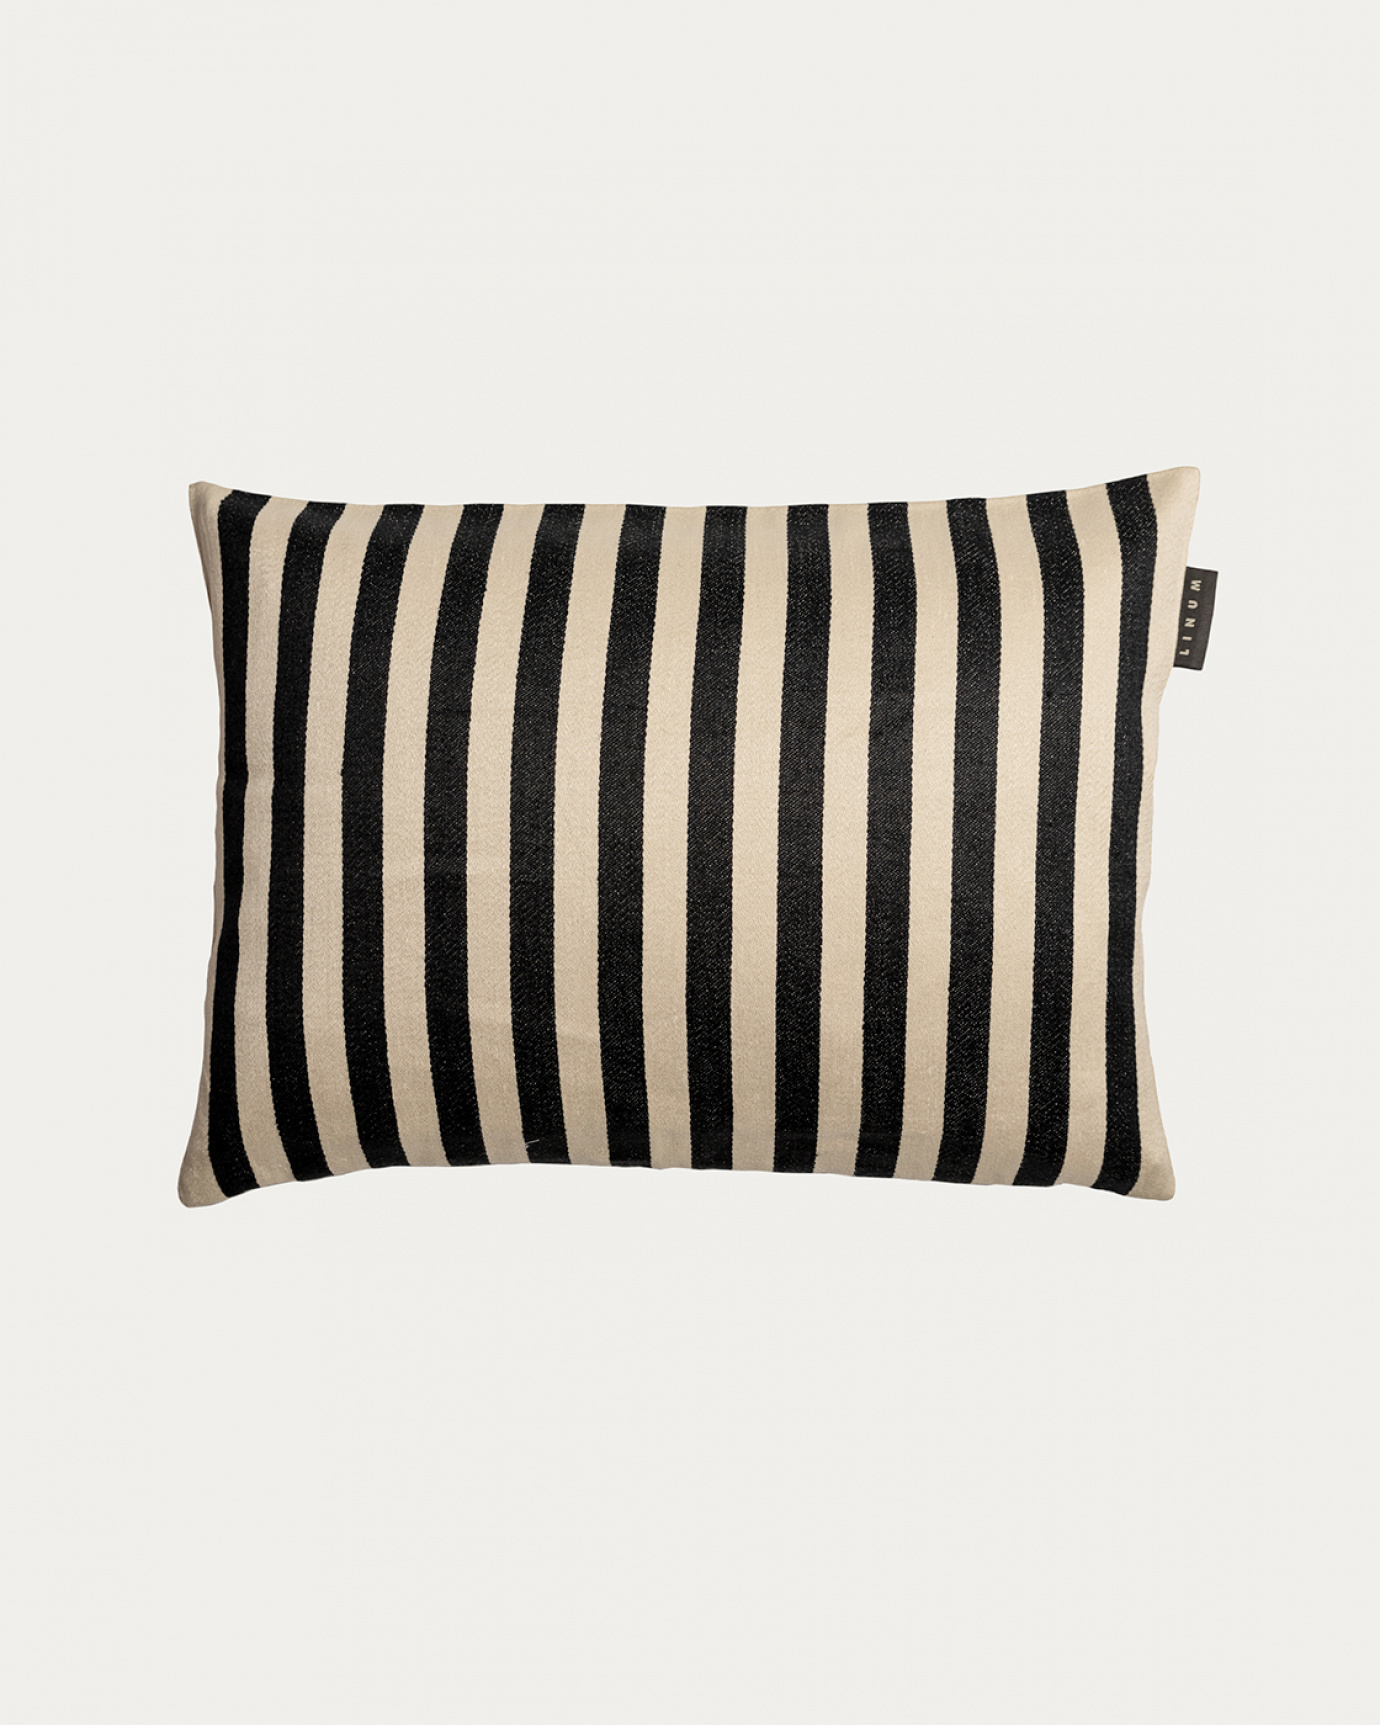 Product image black AMALFI cushion cover with wide stripes made of 77% linen and 23% cotton from LINUM DESIGN. Size 35x50 cm.